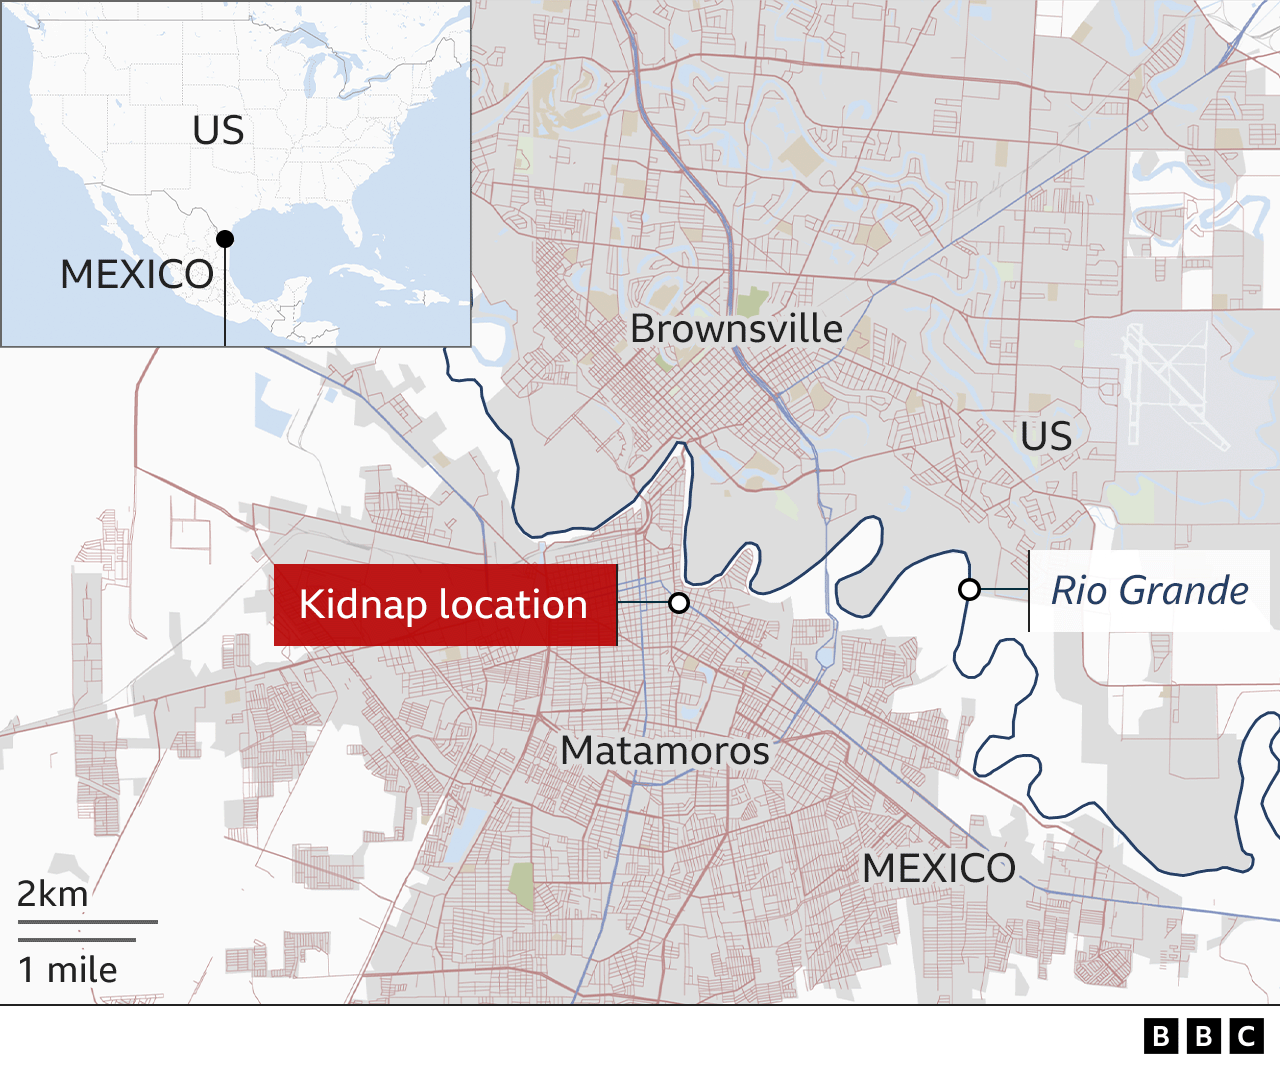 Two dead, two alive after Americans kidnapped in Mexico image